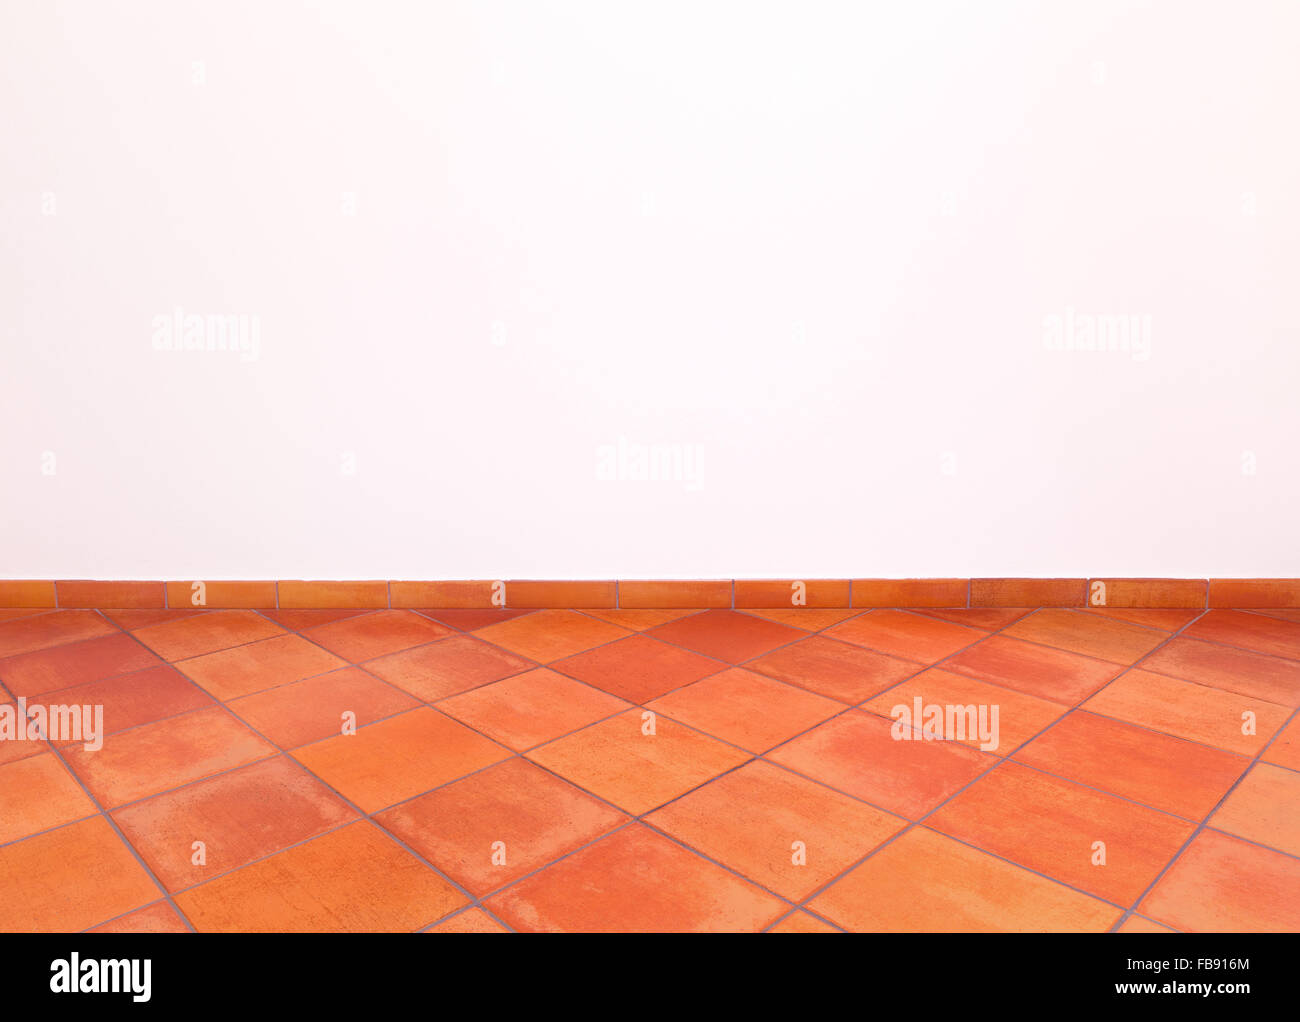 Tuscan traditional old and grunge floor, red tiles and white wall. Italian rural interior empty room. Stock Photo